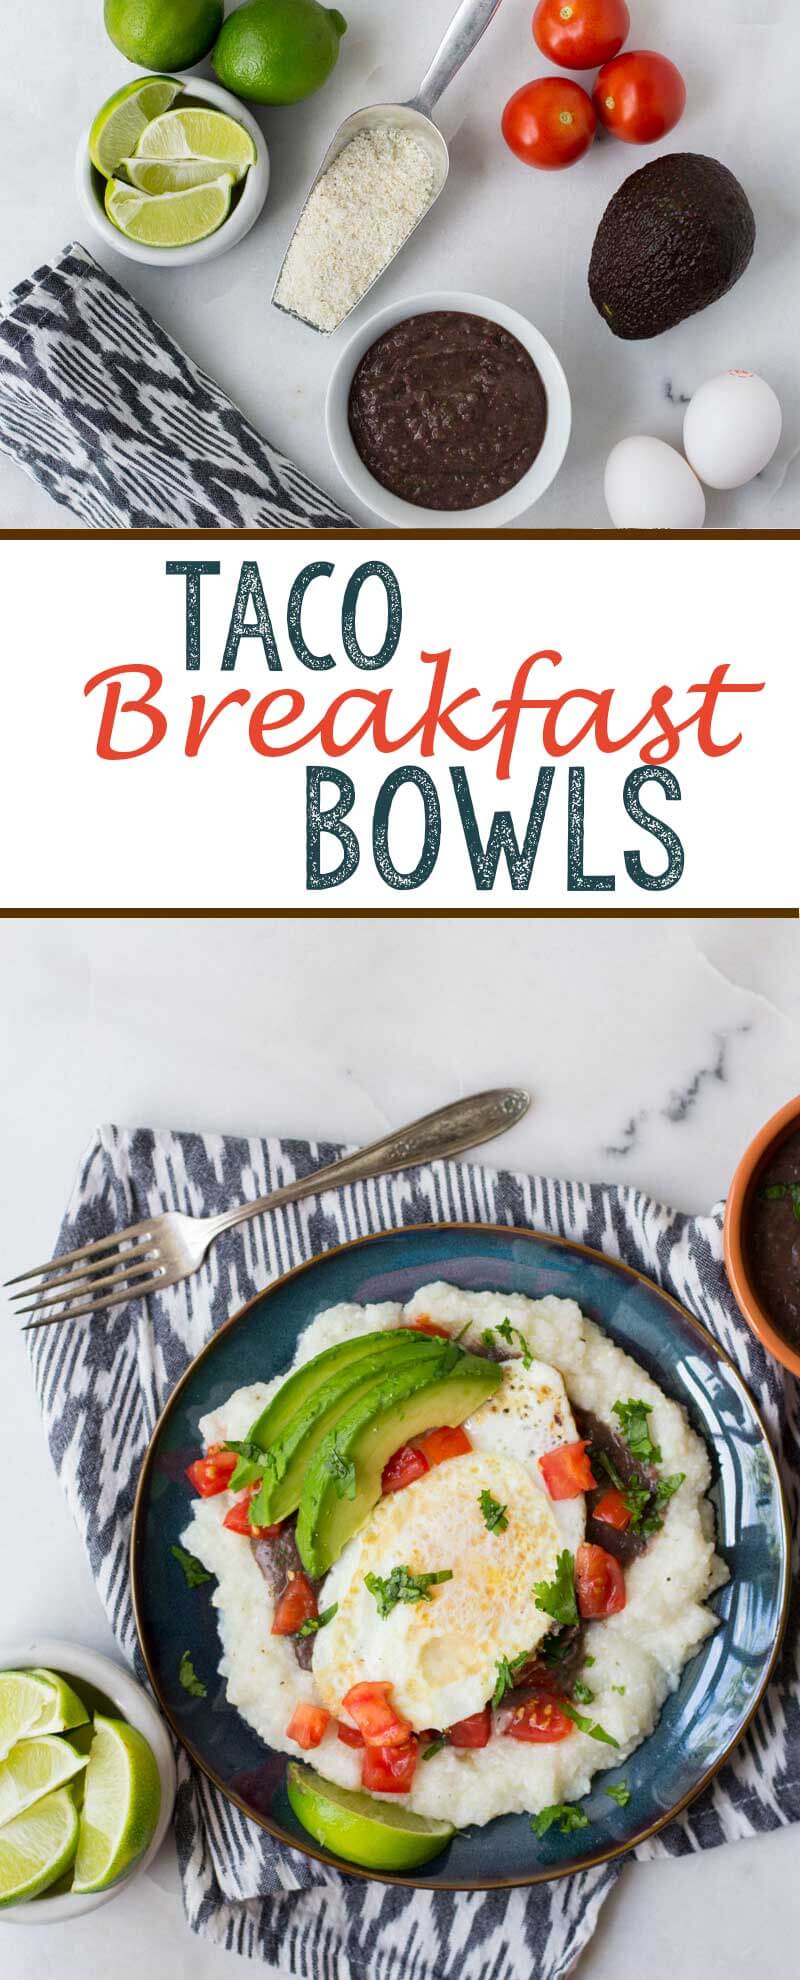 Taco breakfast bowls are a mouthwatering breakfast option